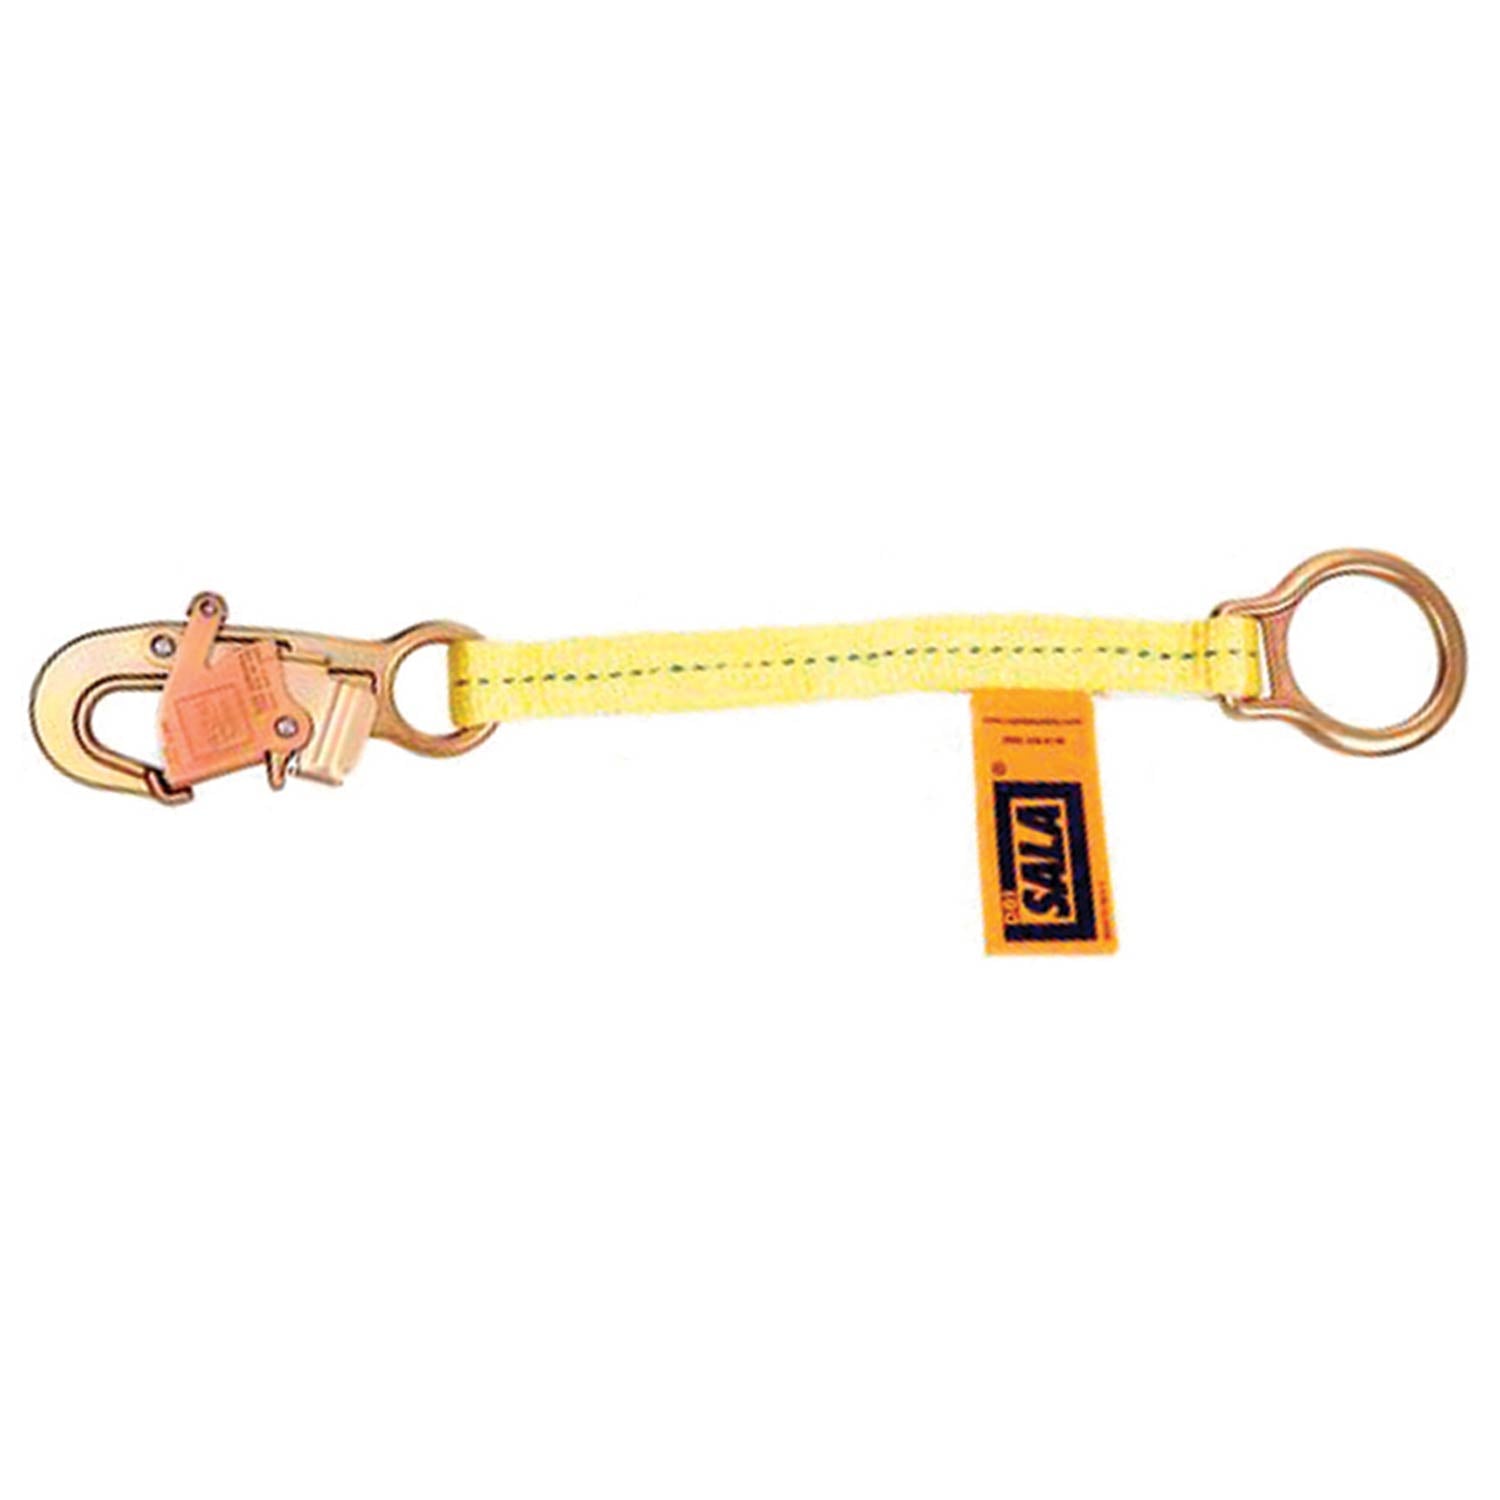 PROTECTA® PRO™ Chain Rebar/Positioning Lanyard with Swivel